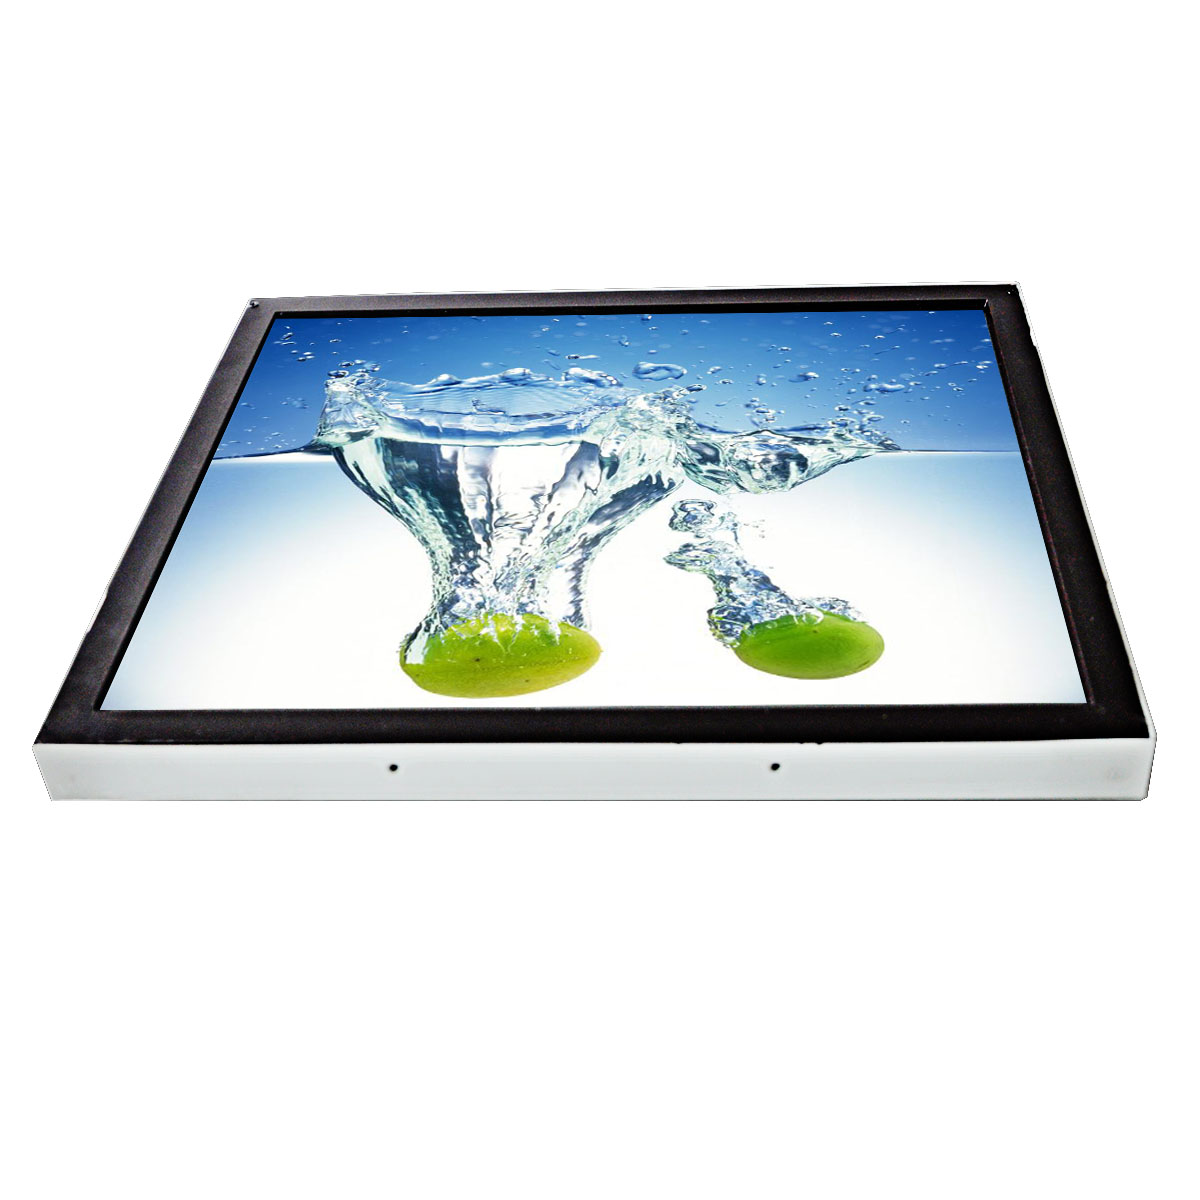 https://www.cjtouch.com/19-inch-ip65-waterproof-infrared-pc-monitor-touch-screen-product/